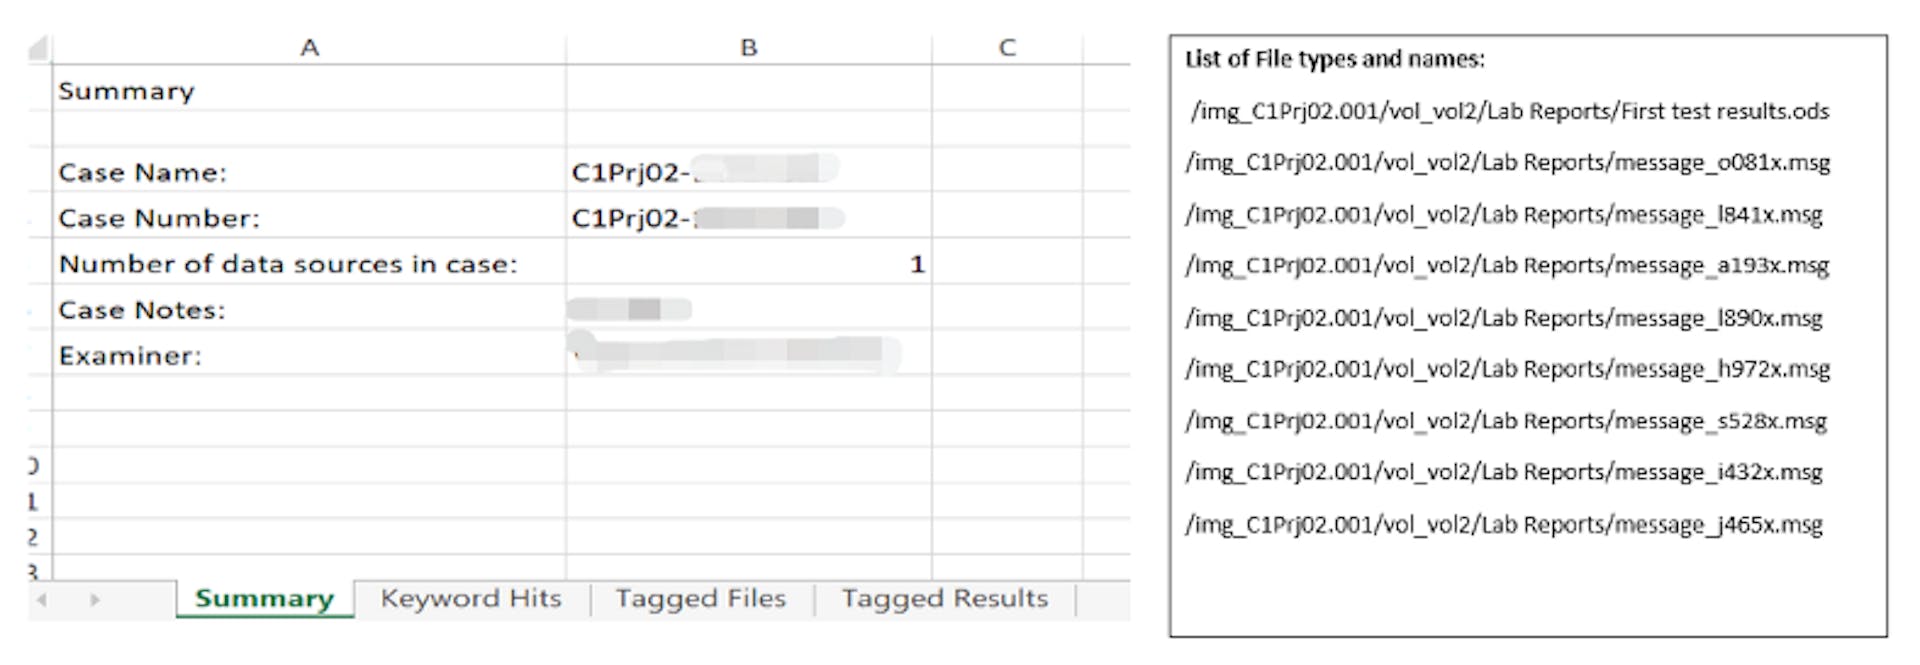 Figure 14. List of File types and file names with Memo report.